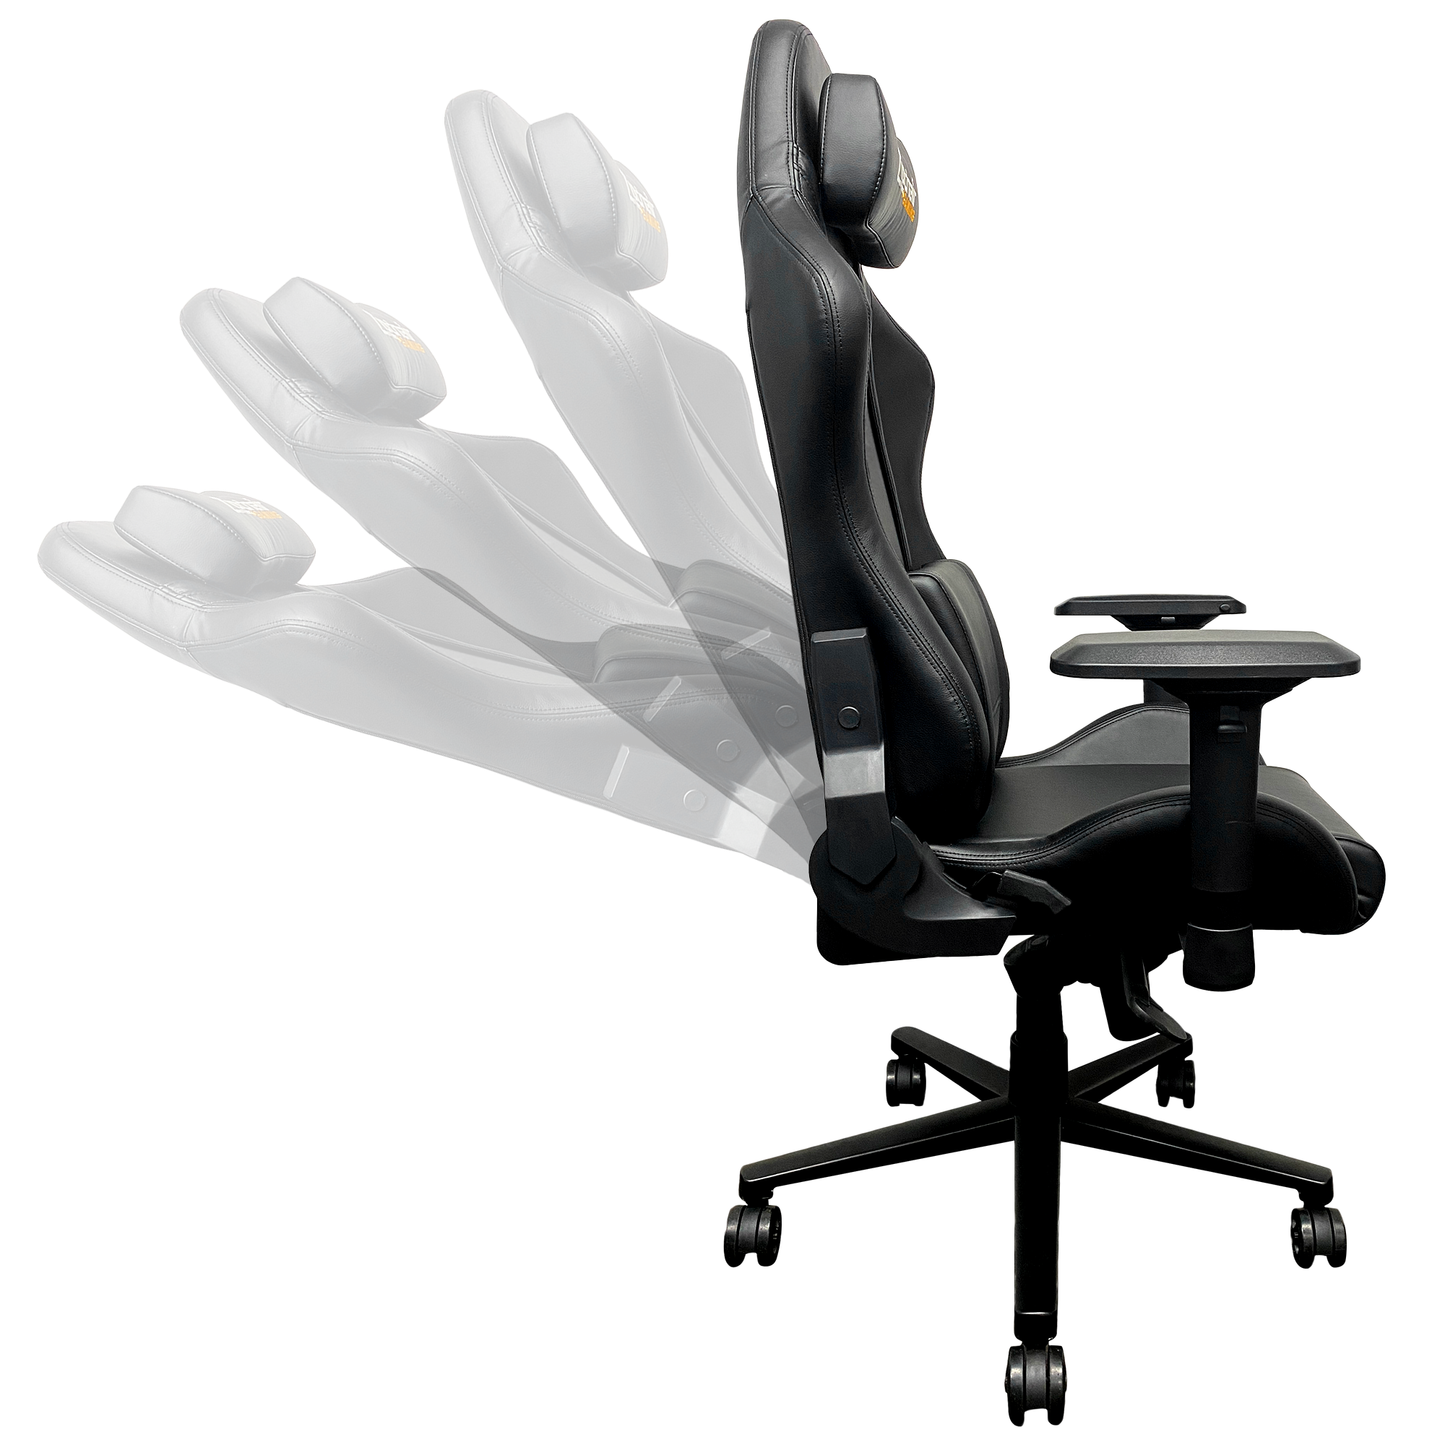 Xpression Pro Gaming Chair with Vancouver Canucks Alternate Logo